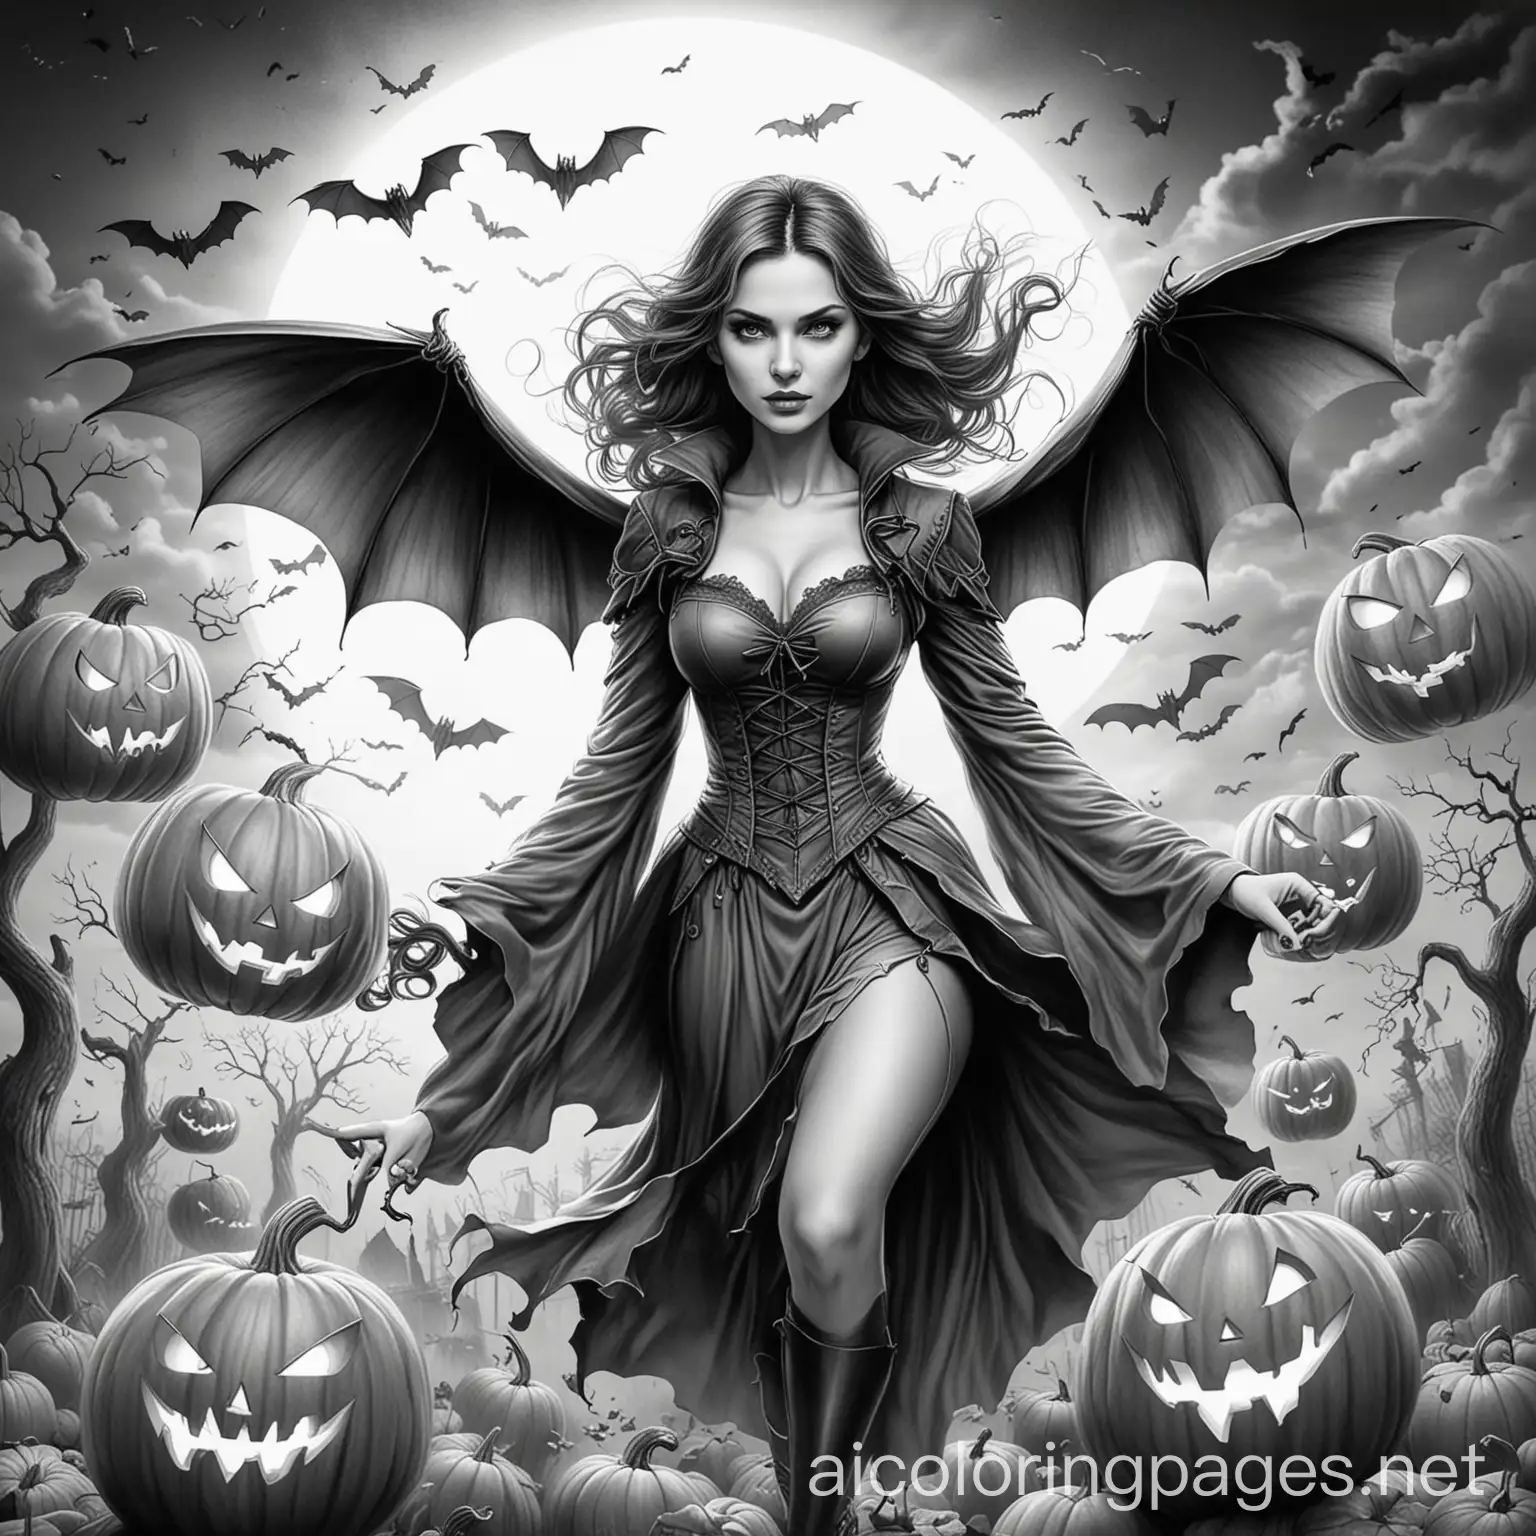 Vampire-Surrounded-by-Flying-Halloween-Pumpkins-Coloring-Page